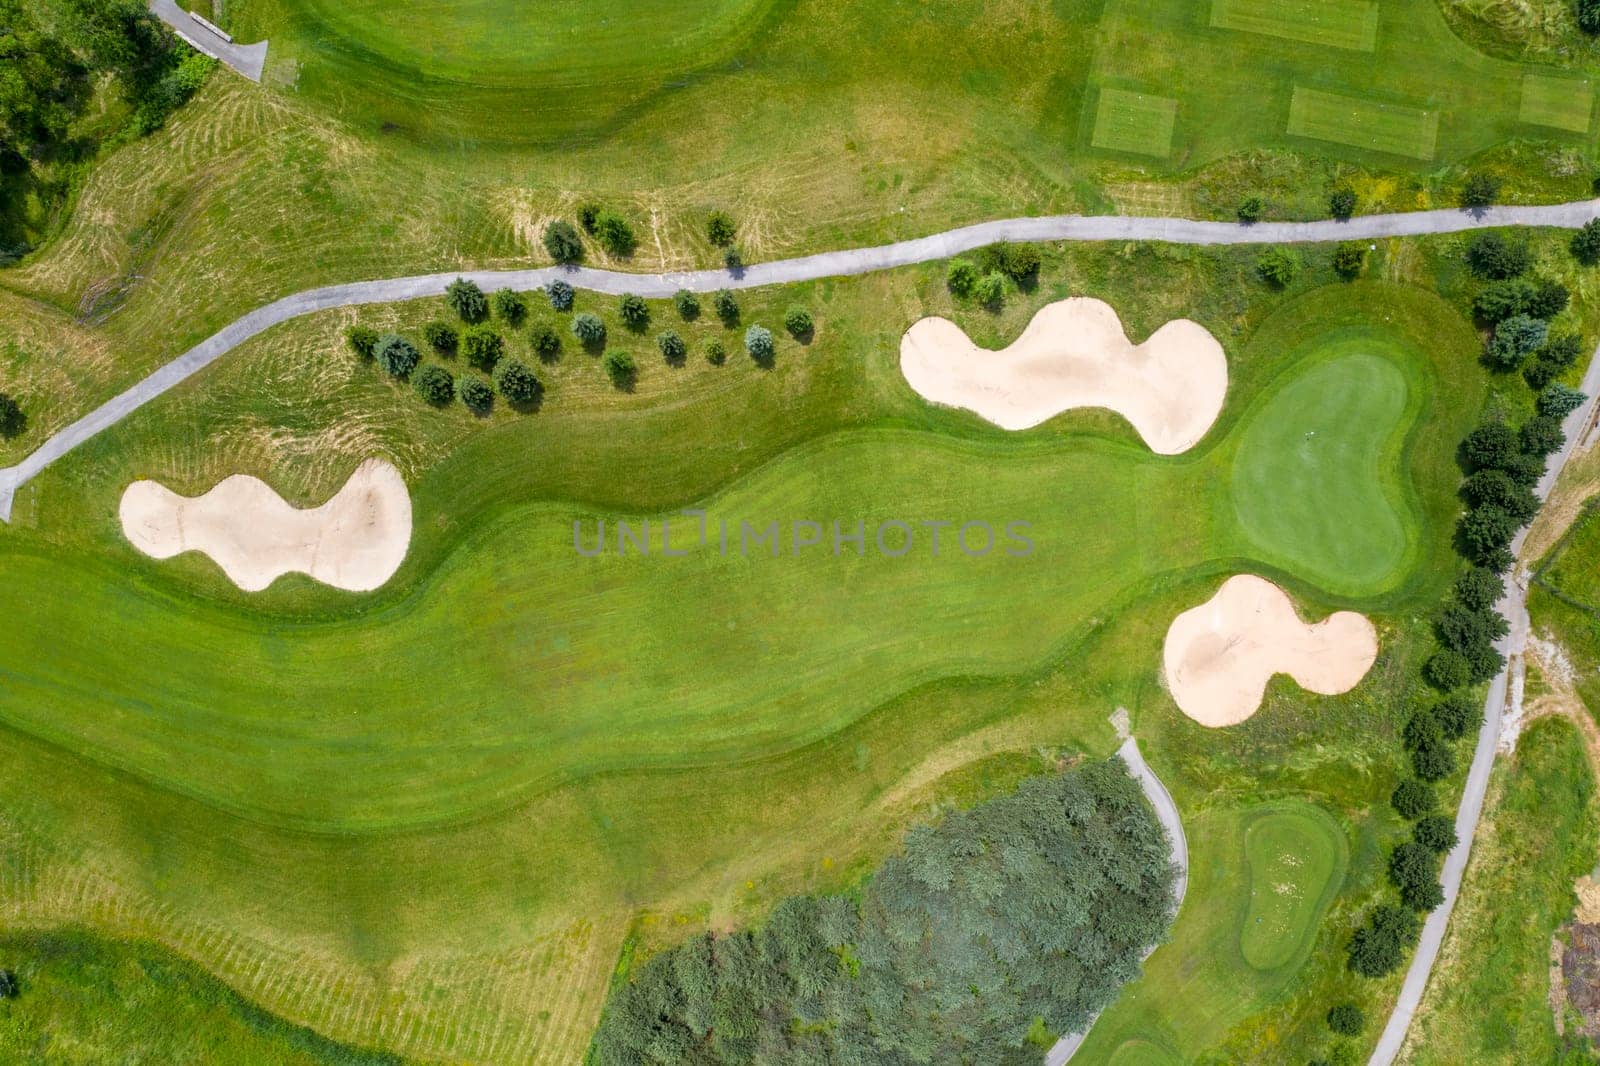 Landscape in a golf course an aerial view of a green field, lawn, and grass. Design for golfers to play games, sports, and outdoor recreation activities.